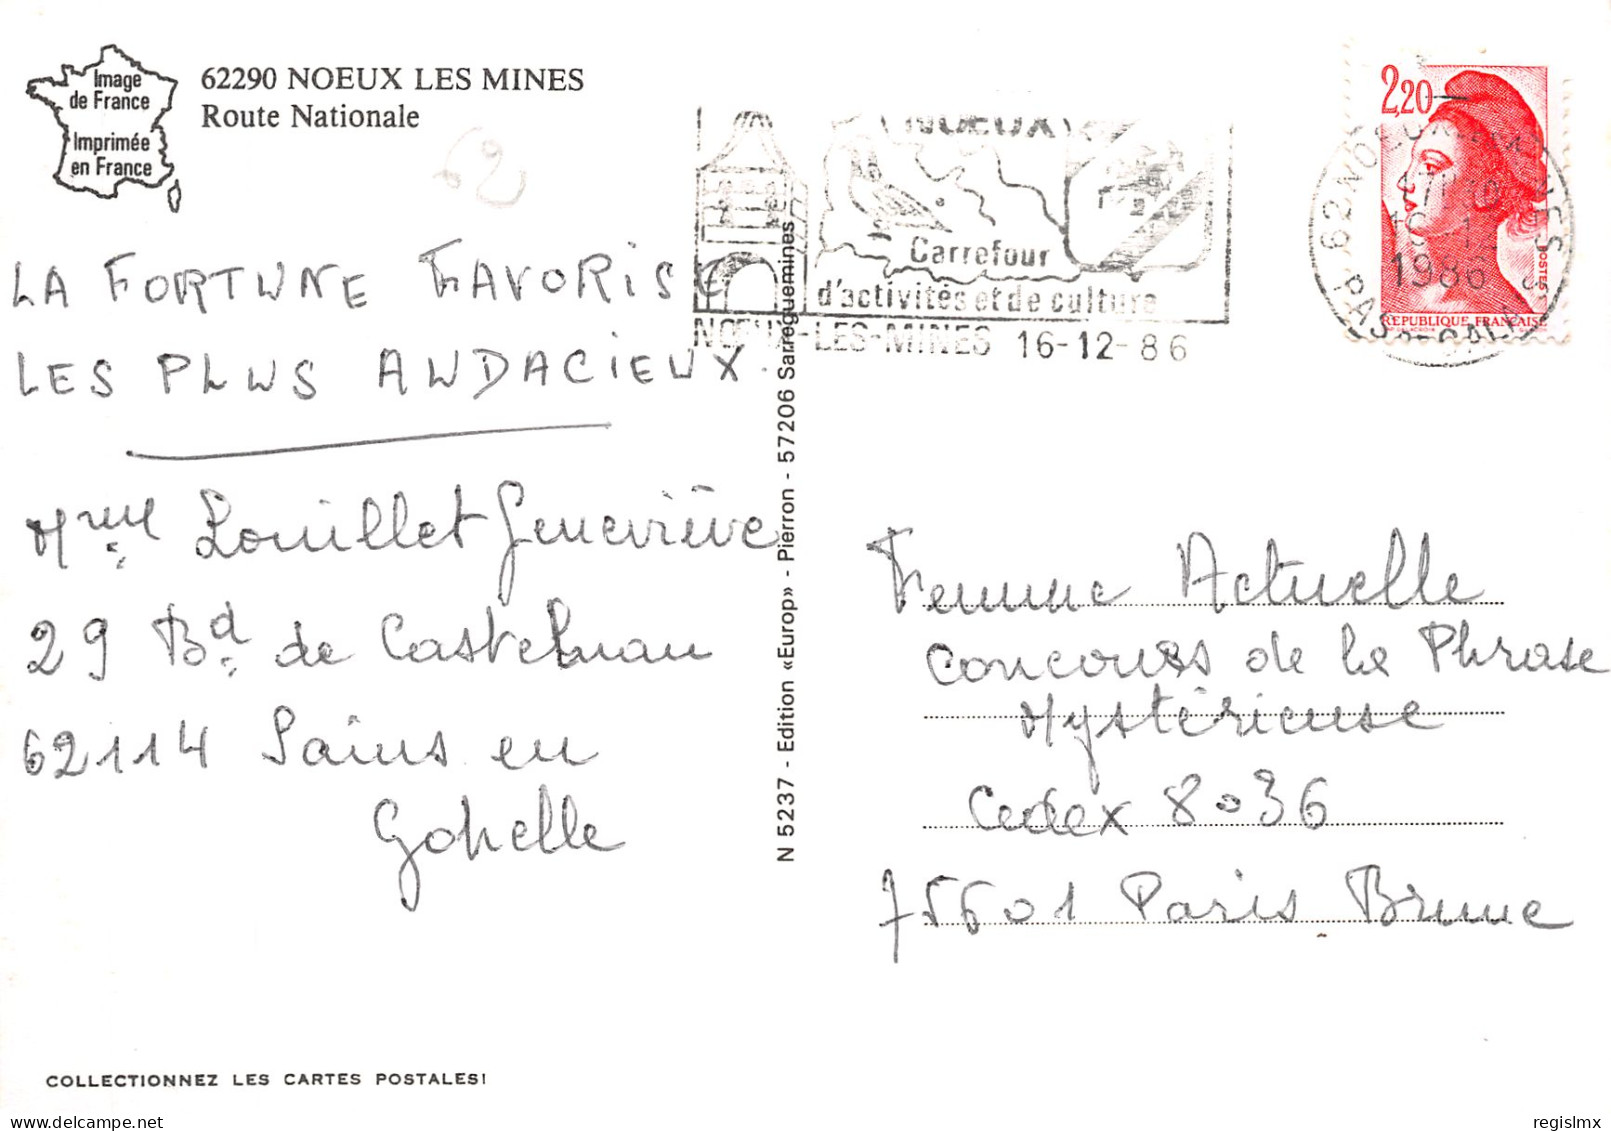 62-NOEUX LES MINES-N°T2204-A/0105 - Noeux Les Mines